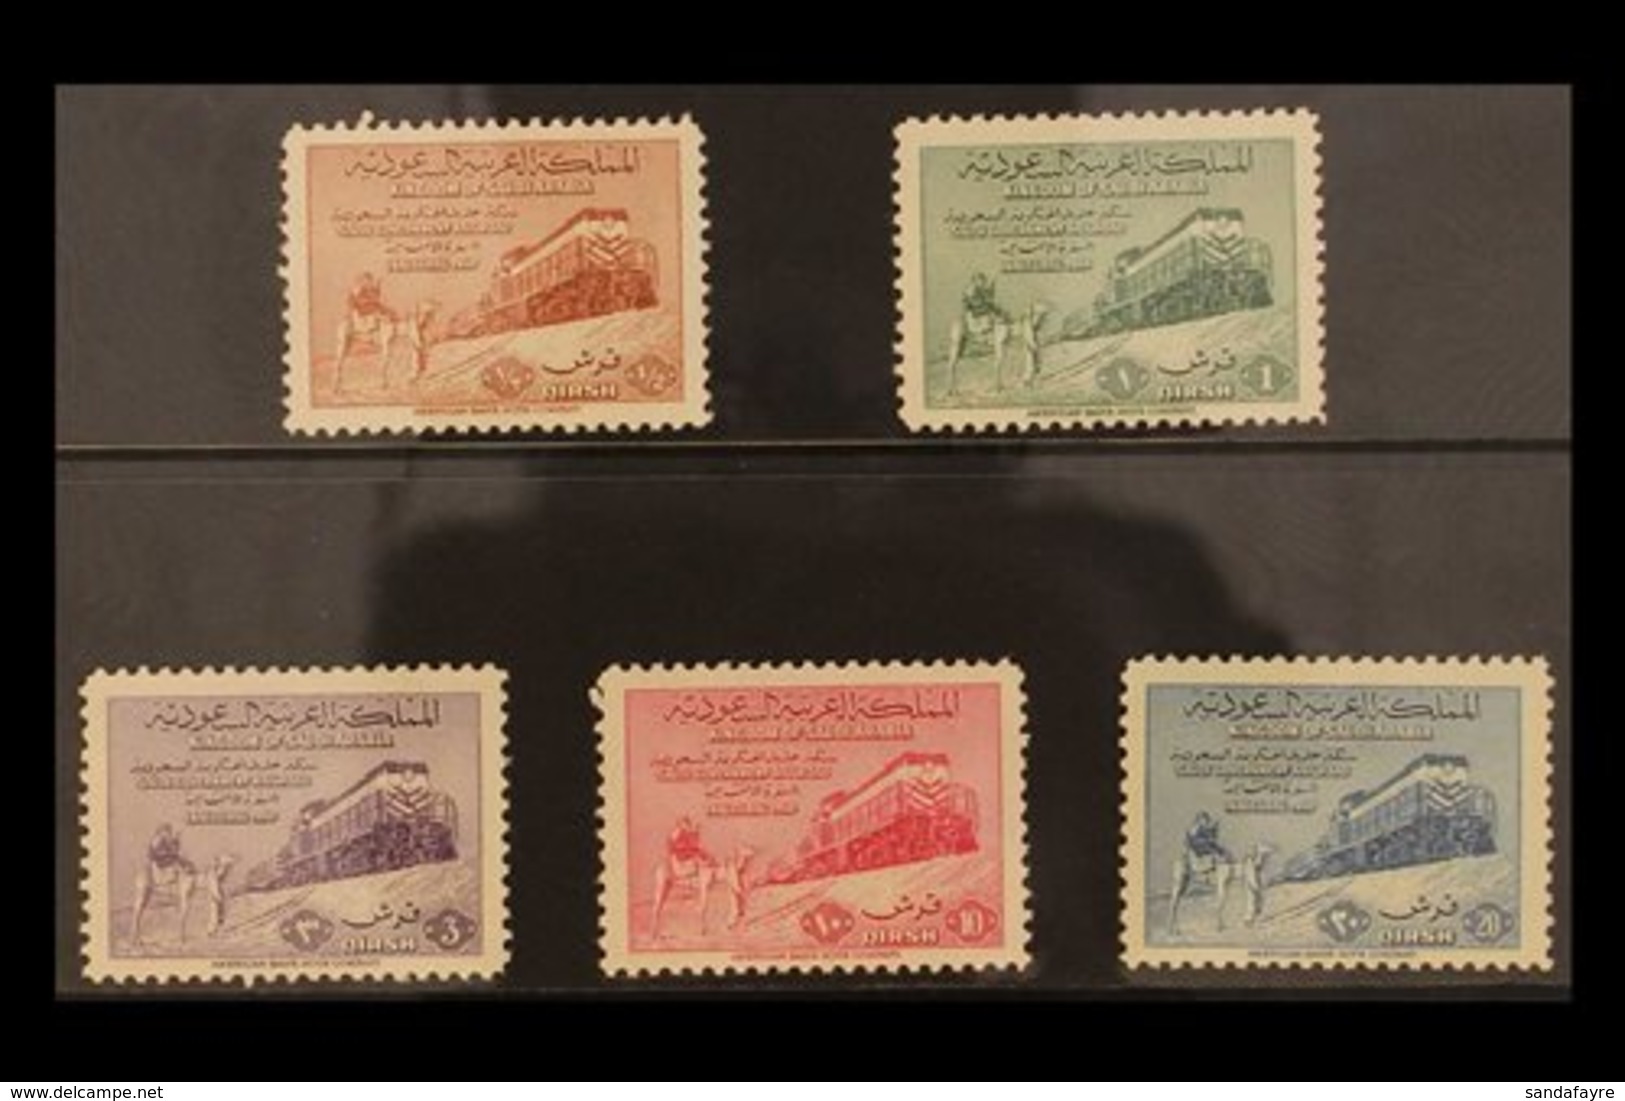 1952  Inauguration Of Dammam-Riyadh Railway Complete Set, SG 372/376, Never Hinged Mint. (5 Stamps) For More Images, Ple - Saudi-Arabien